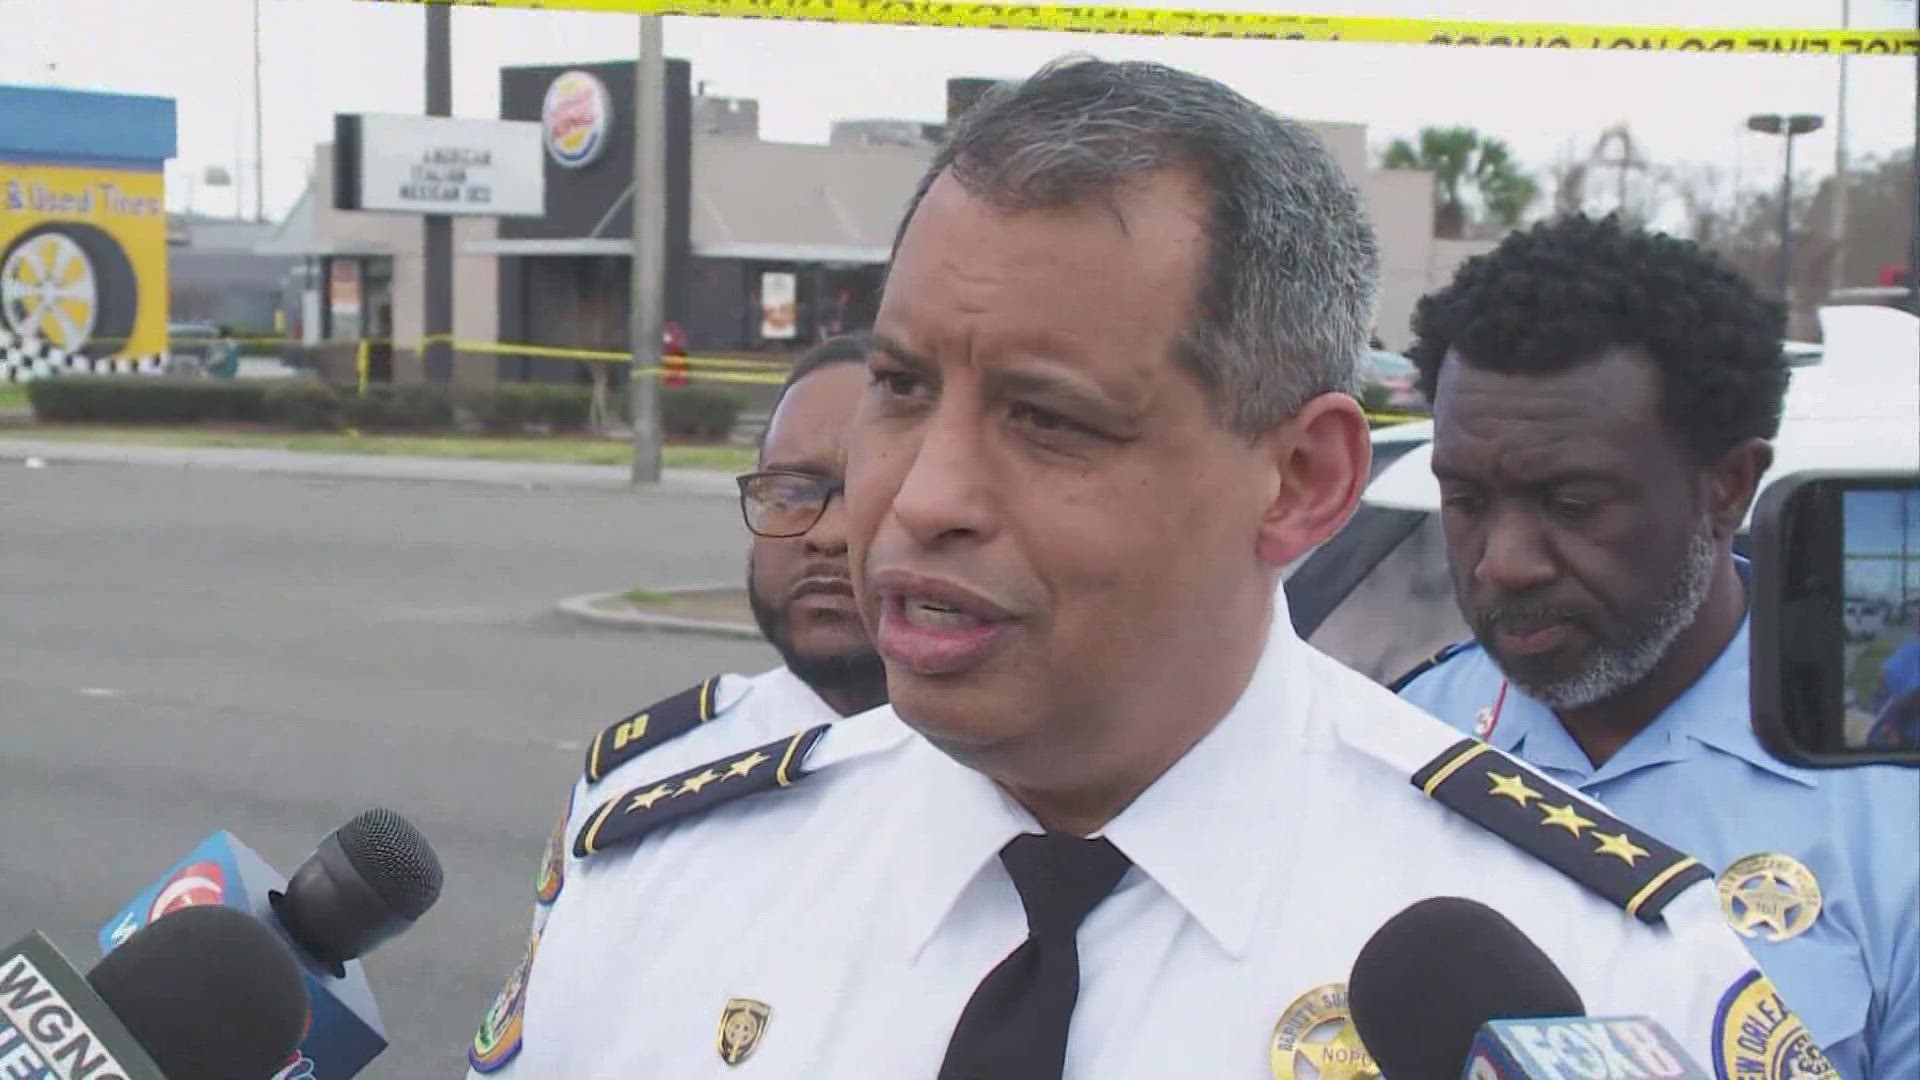 NOPD Chief Deputy Supt. Hans Ganthier gives an update on the fatal shooting near the Gentilly Walmart.